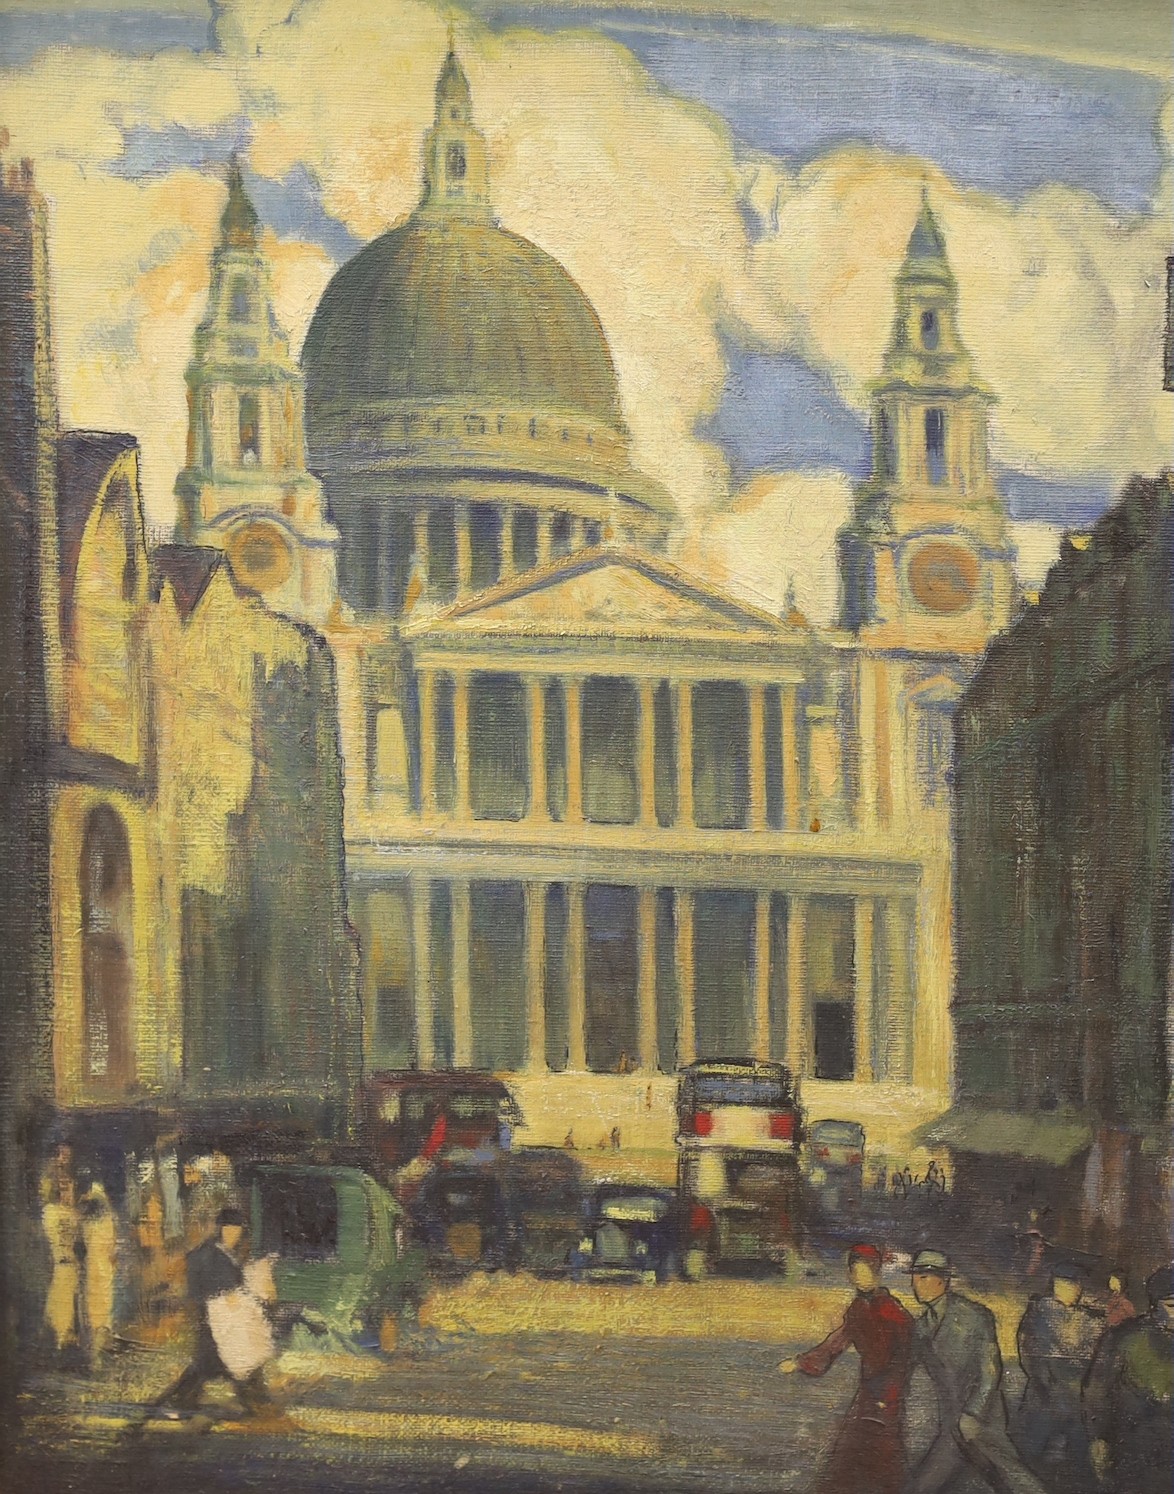 Modern British, oil on canvas, View of St Paul's Cathedral, initialled and dated '32, 50 x 40cm